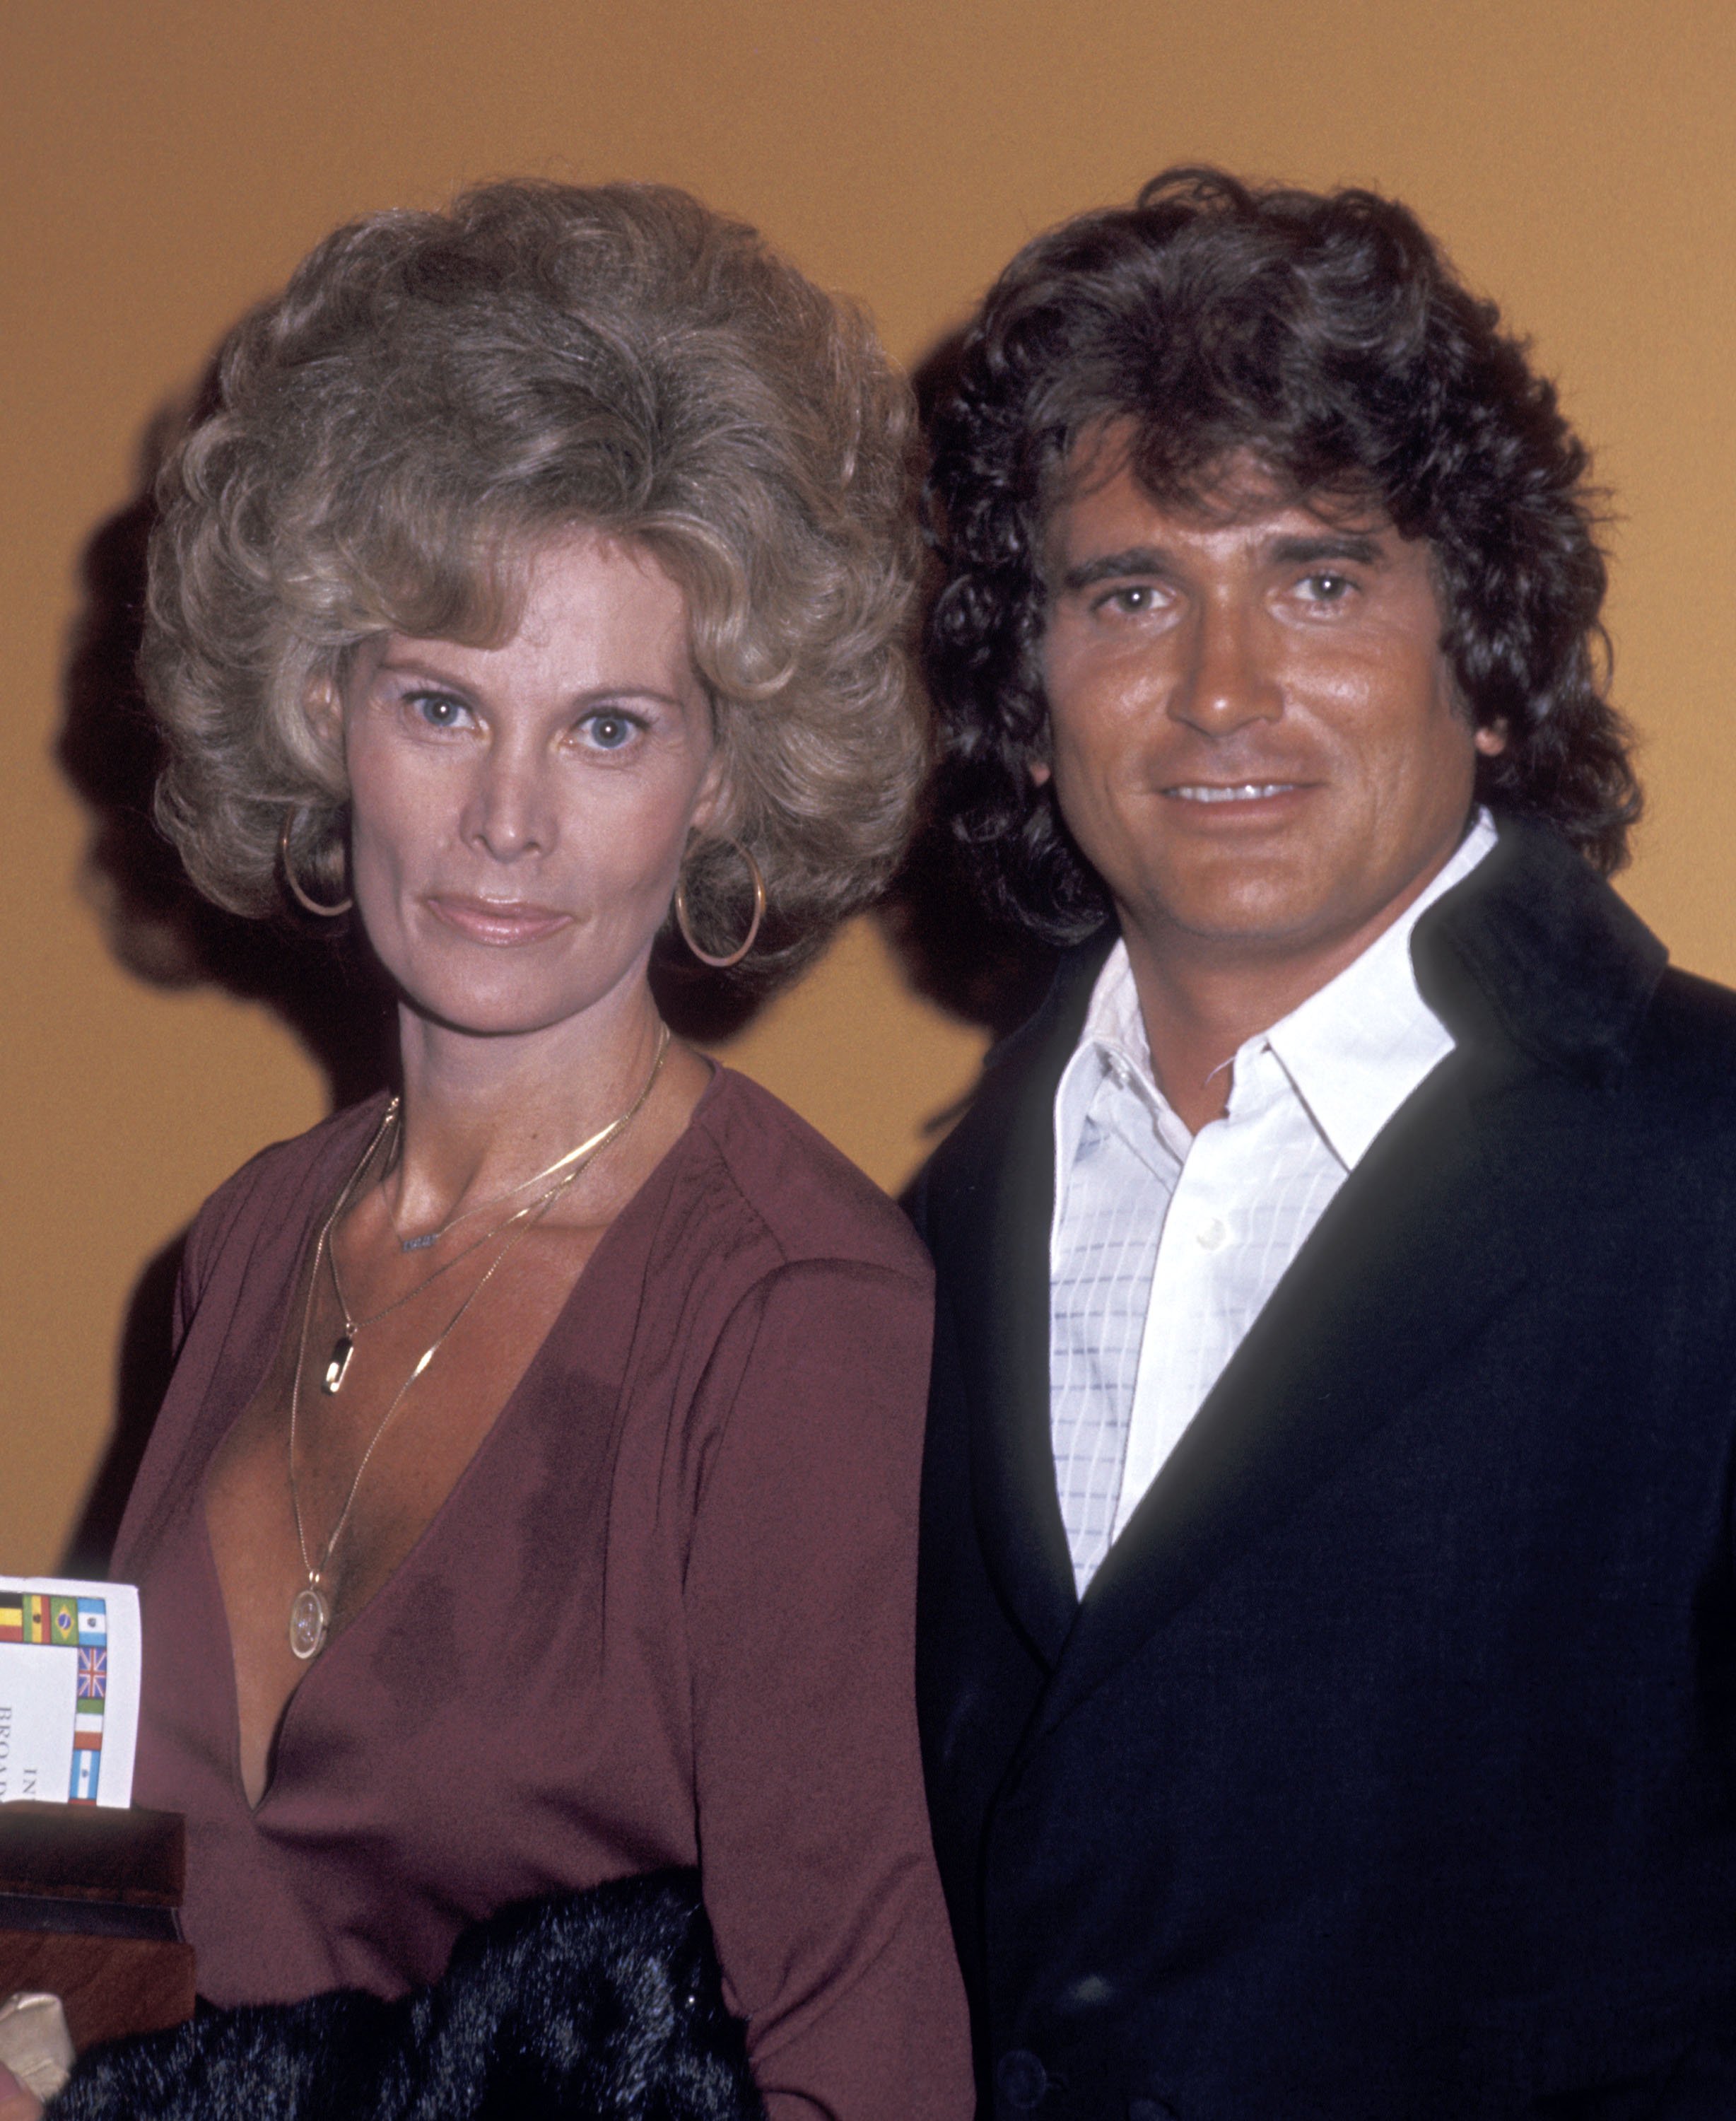 Michael Landon and wife Lynn Noe attend the Hollywood Radio and Television Society's 16th Annual International Broadcasting Awards on March 4, 1976 at Century Plaza Hotel in Los Angeles, California